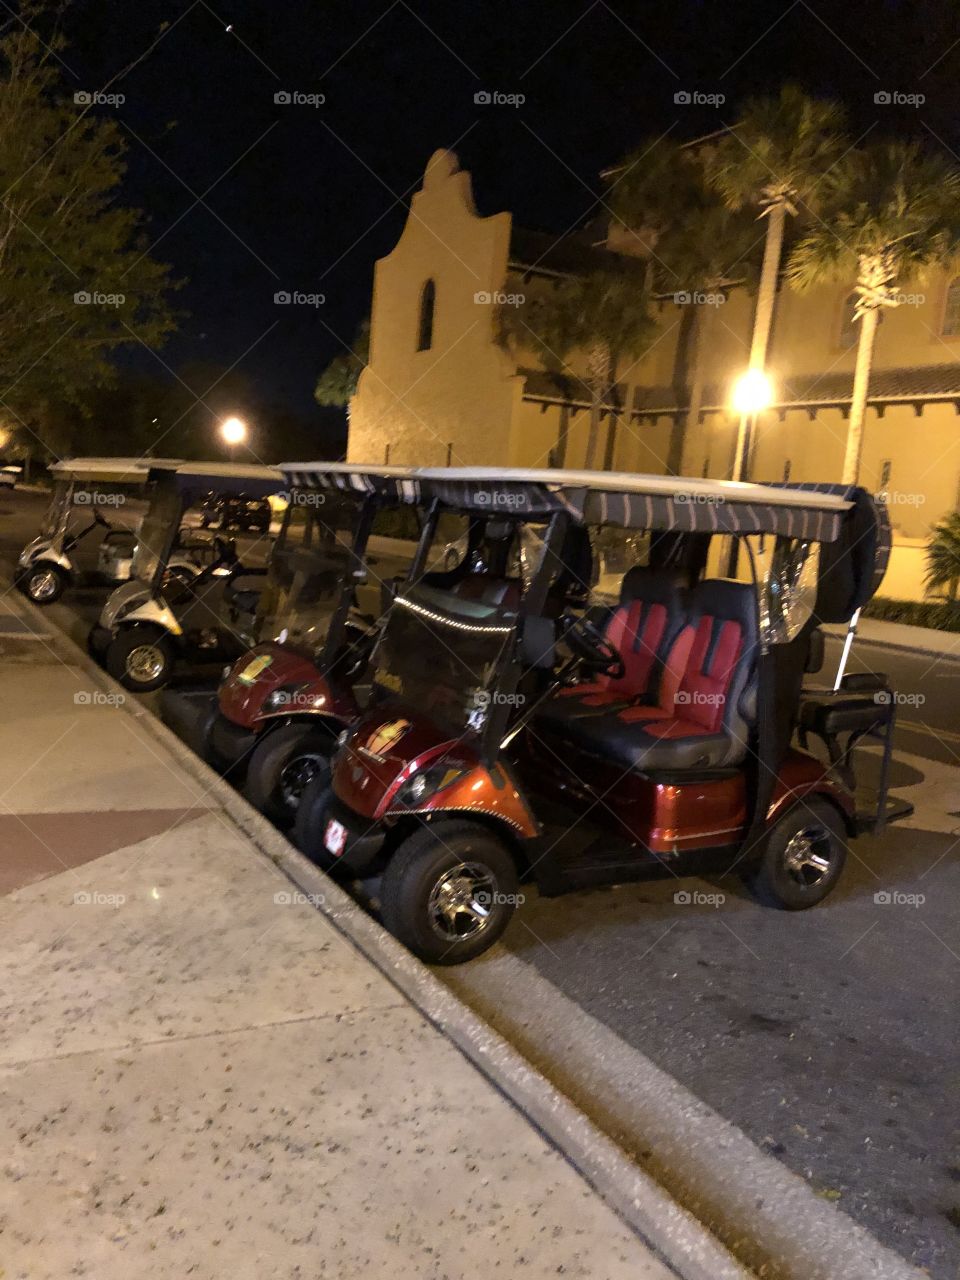 A Village That Uses Golf Carts To Get Around Town